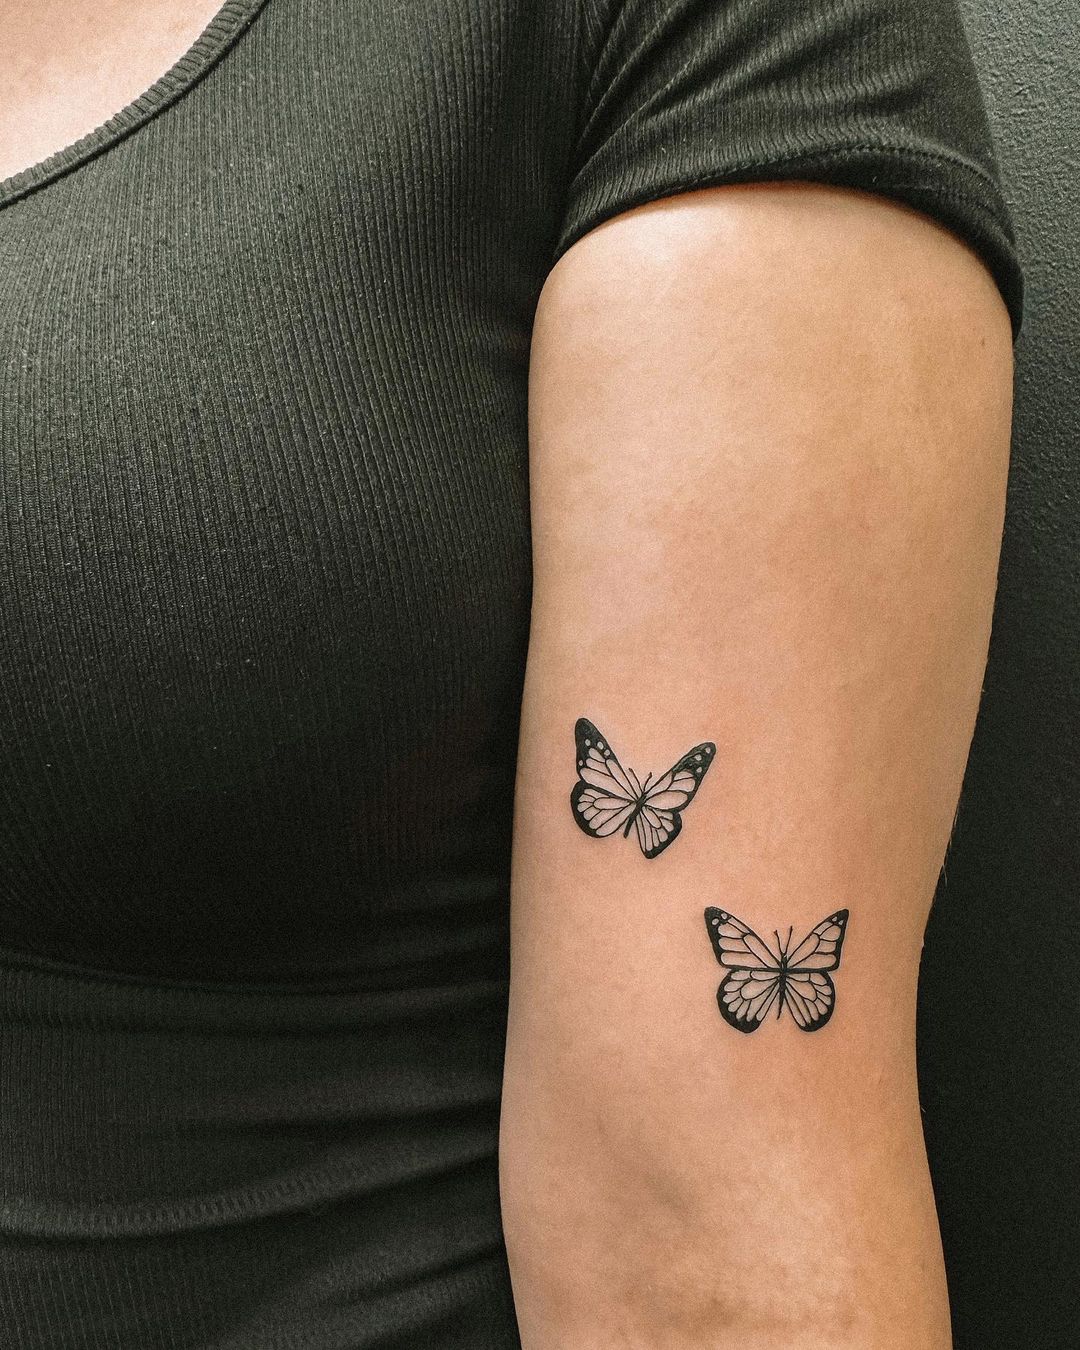 Simple Butterfly Tattoo On Arm